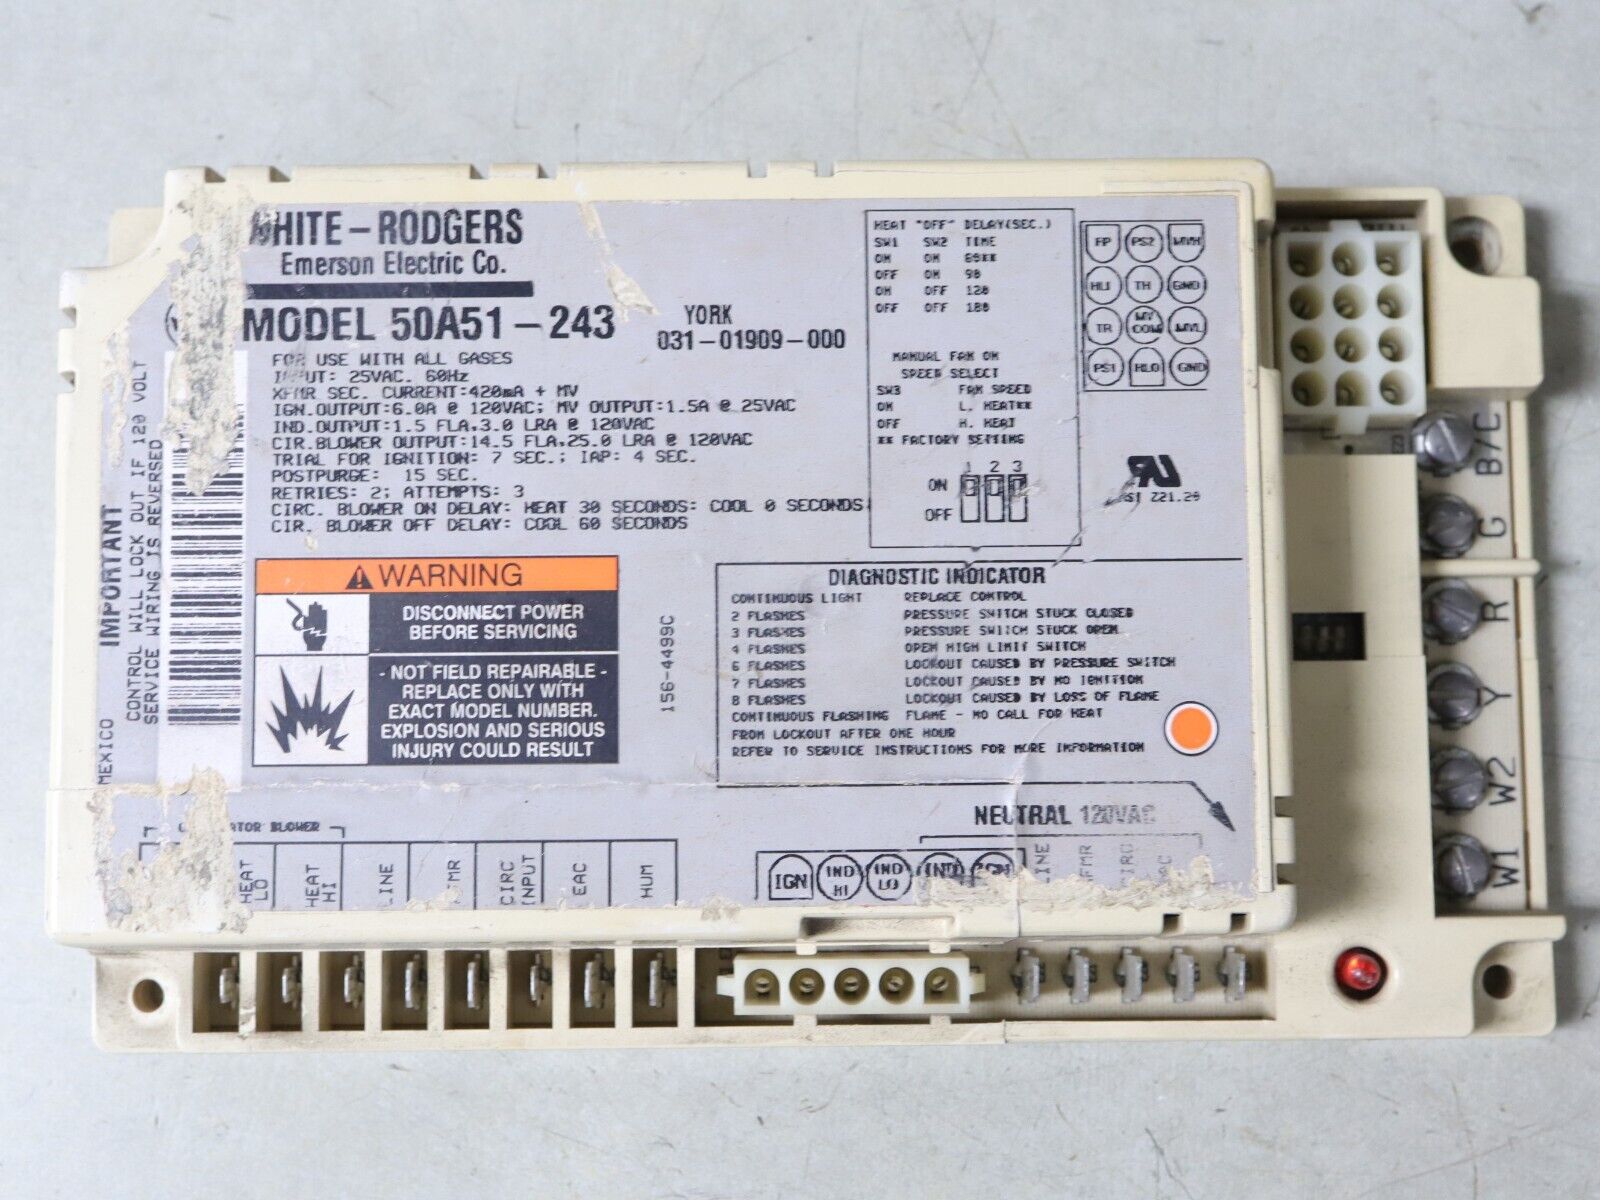 White Rodgers 50A51-243 Furnace Ignition Control Module YORK 031-01909-00